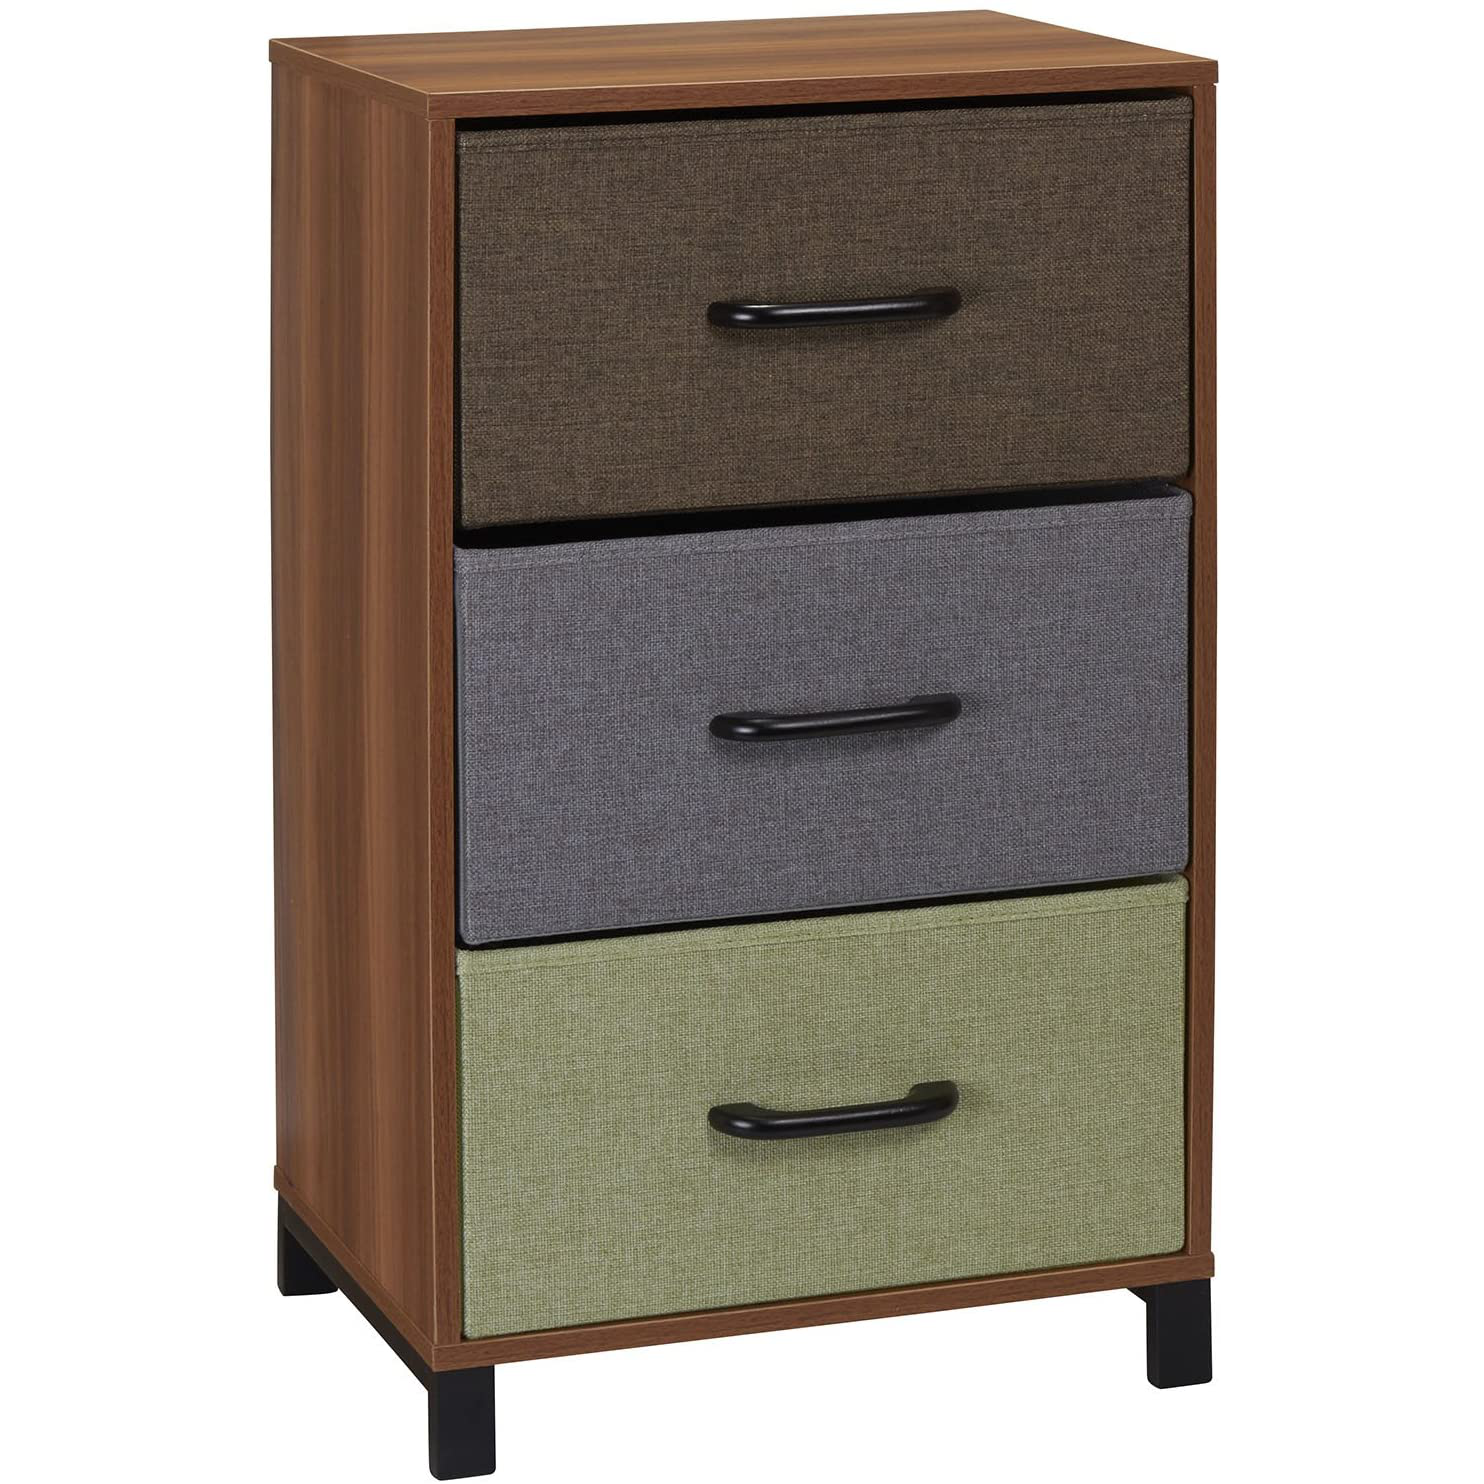 Wooden Night Stand Storage with 3 Drawers